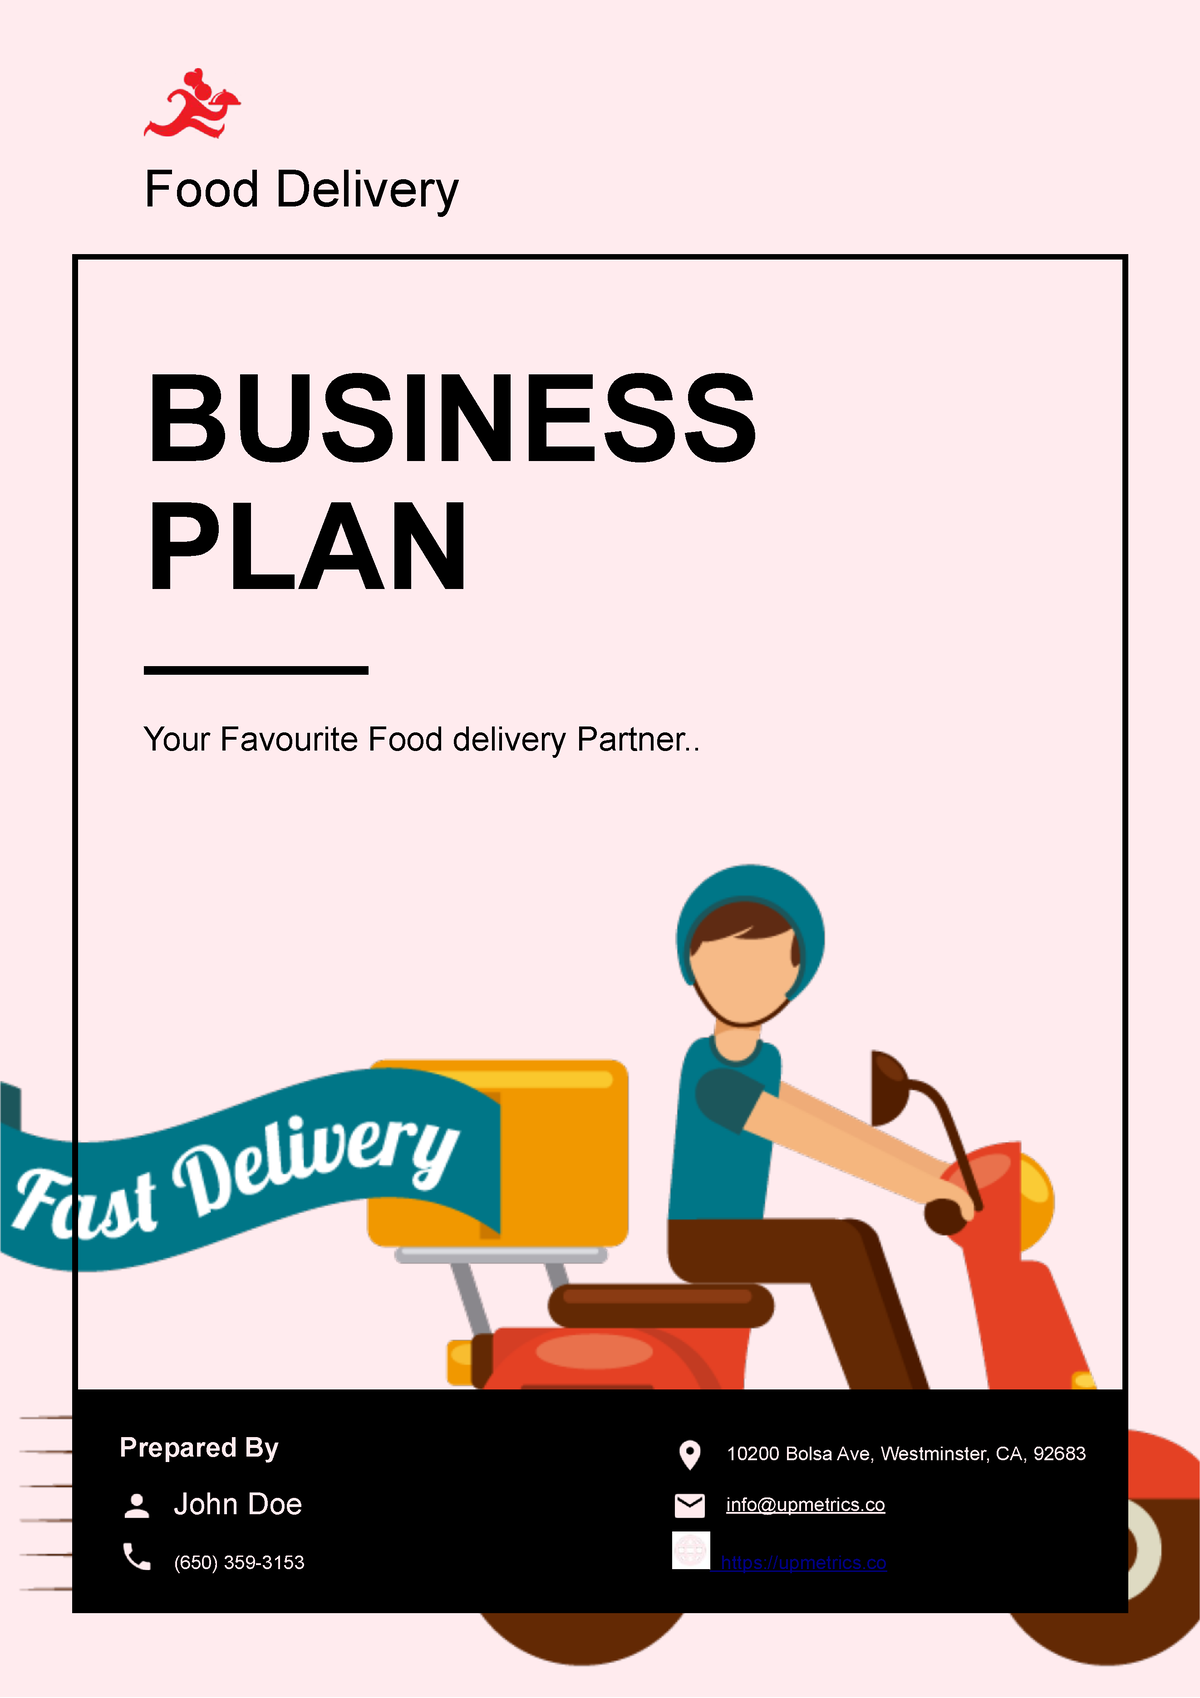 delivery services business plan pdf